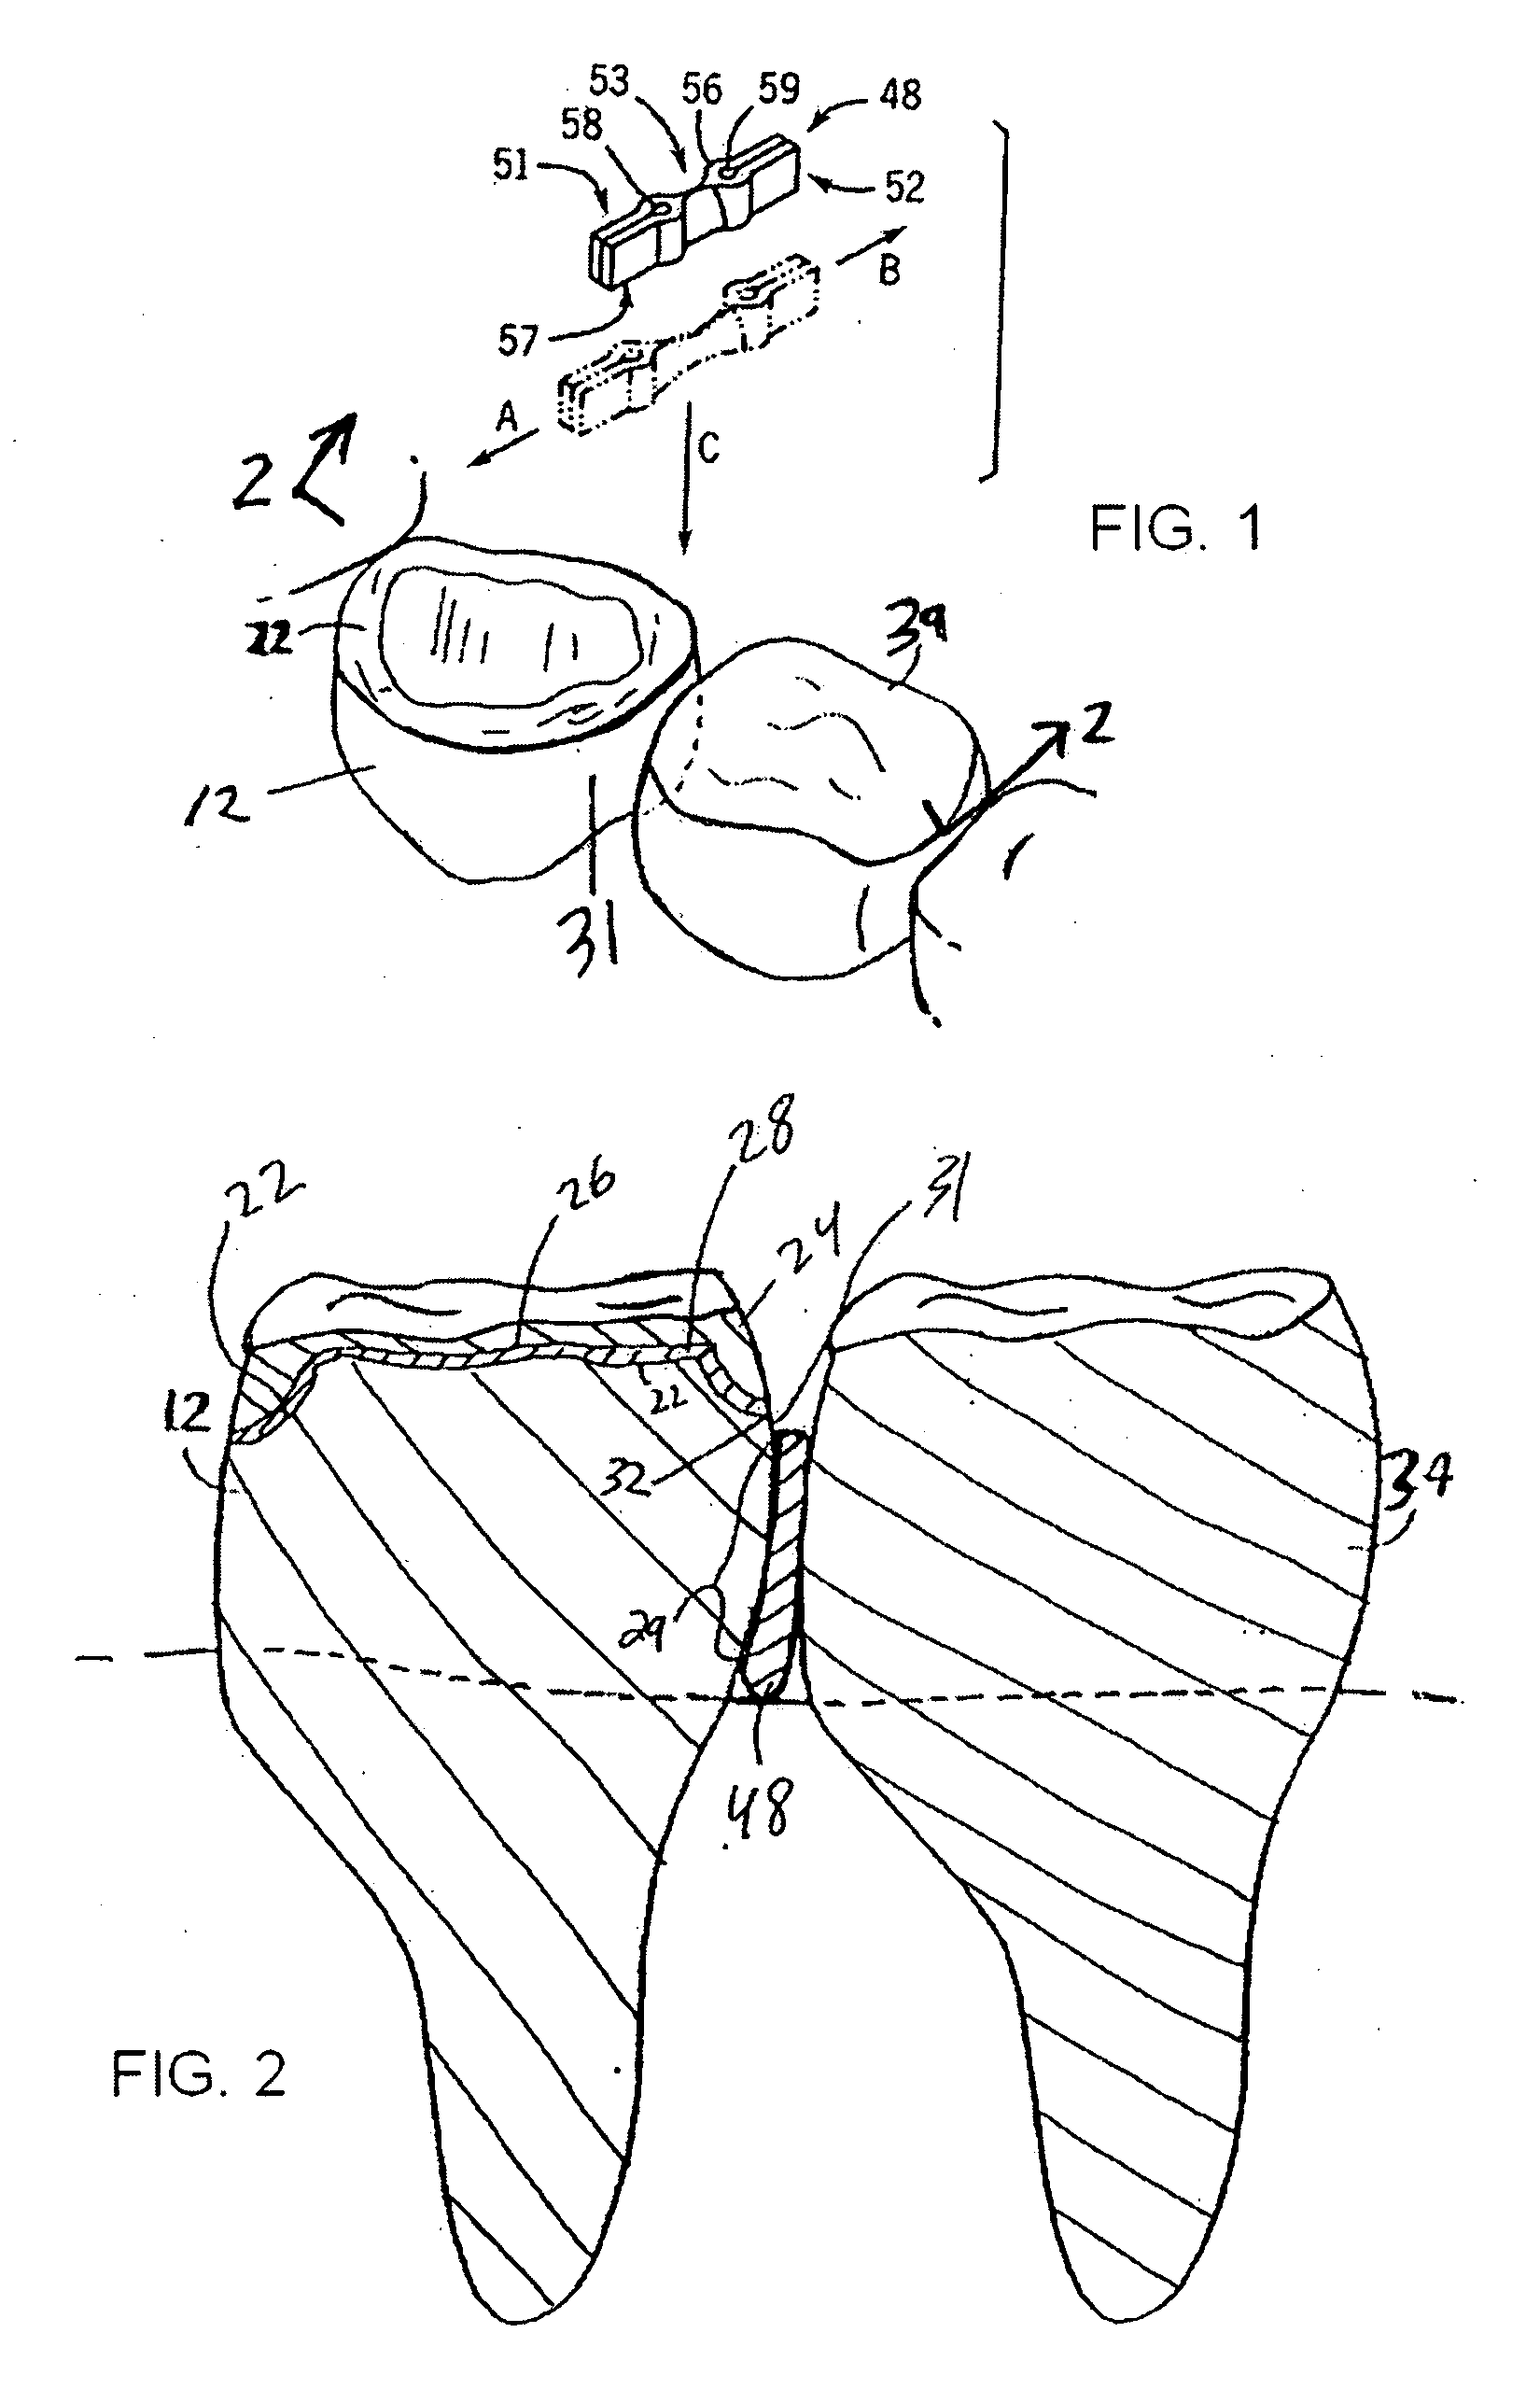 Methods and Devices for Fixed Dental Restoration